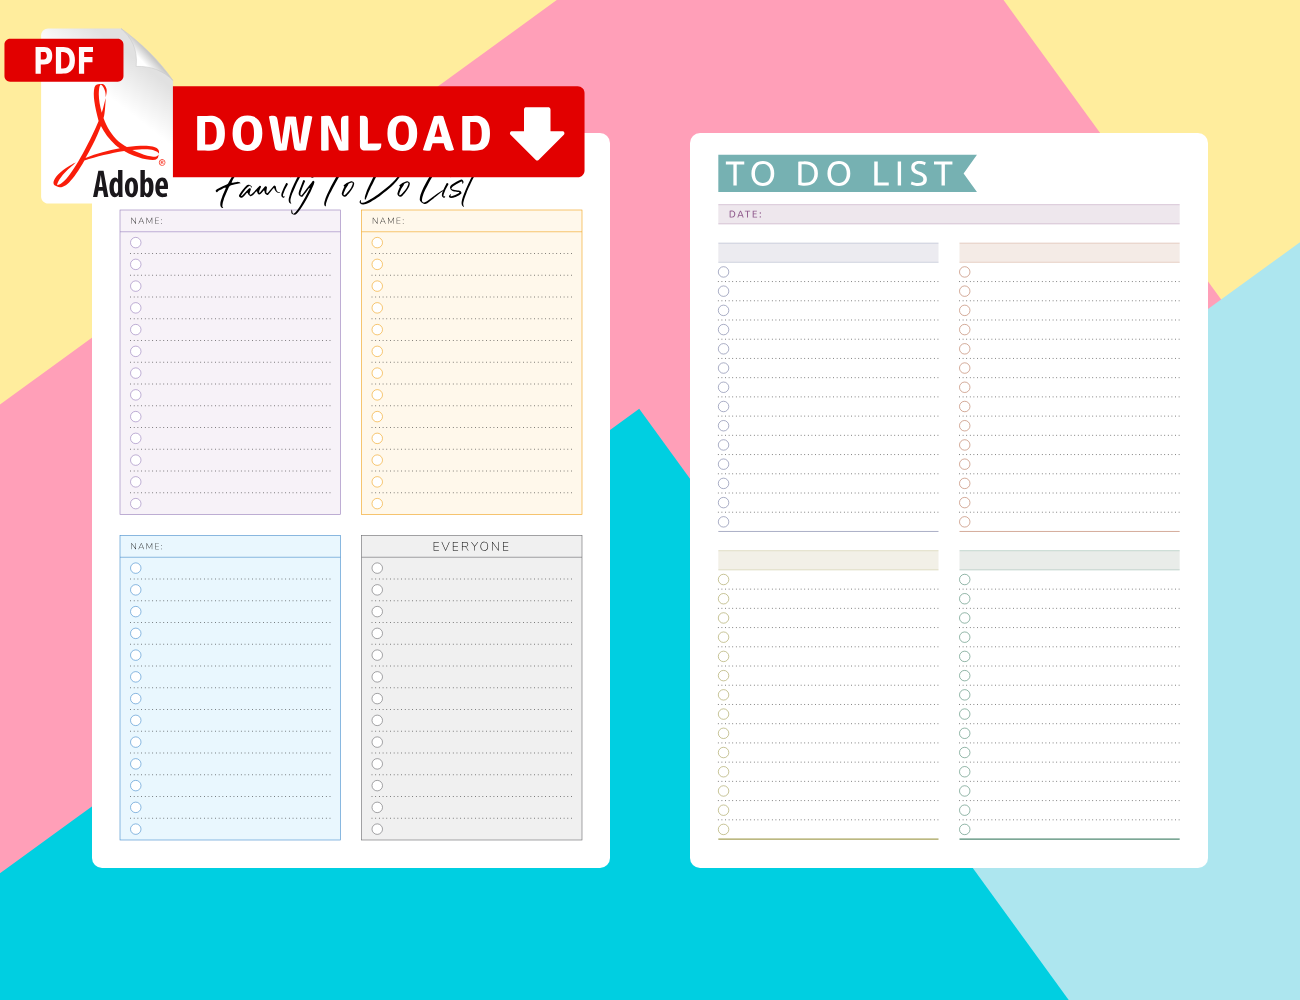 To Do List Templates - Download Task List PDF In Blank To Do List Template